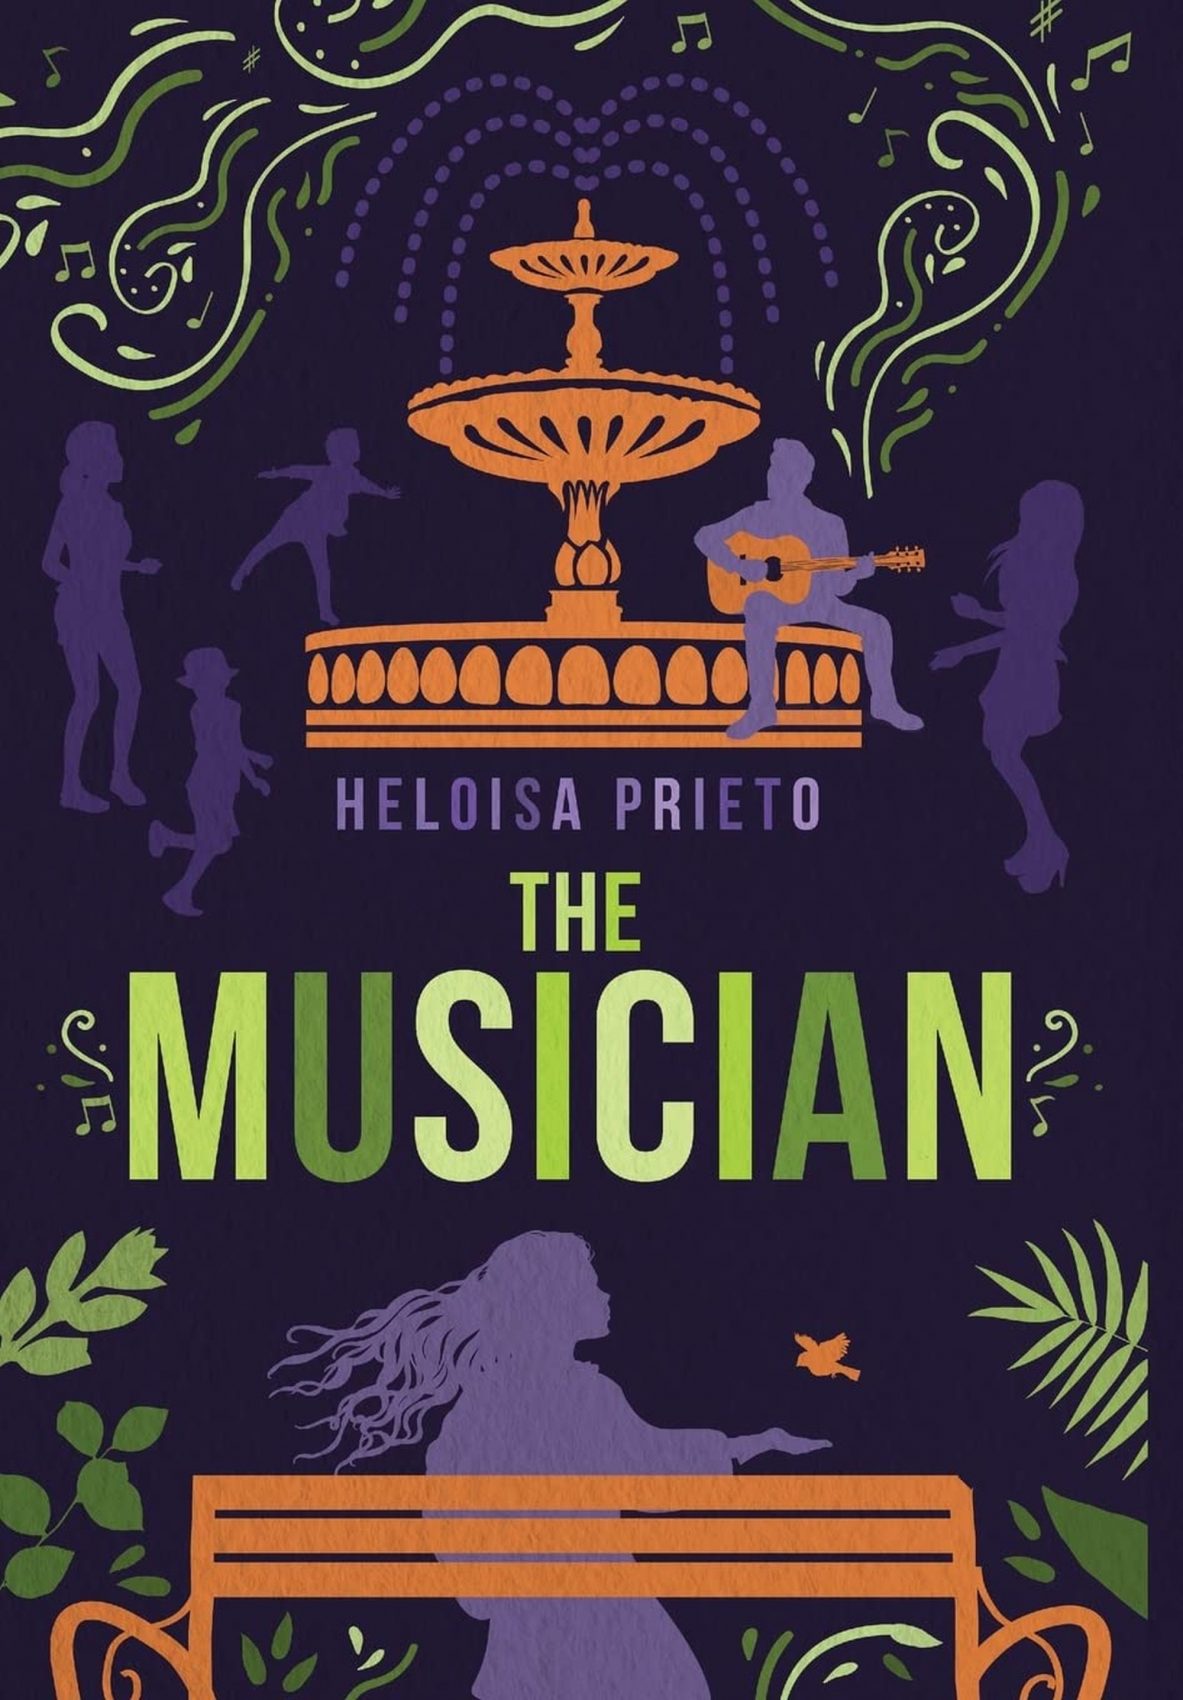 The cover of The Musician